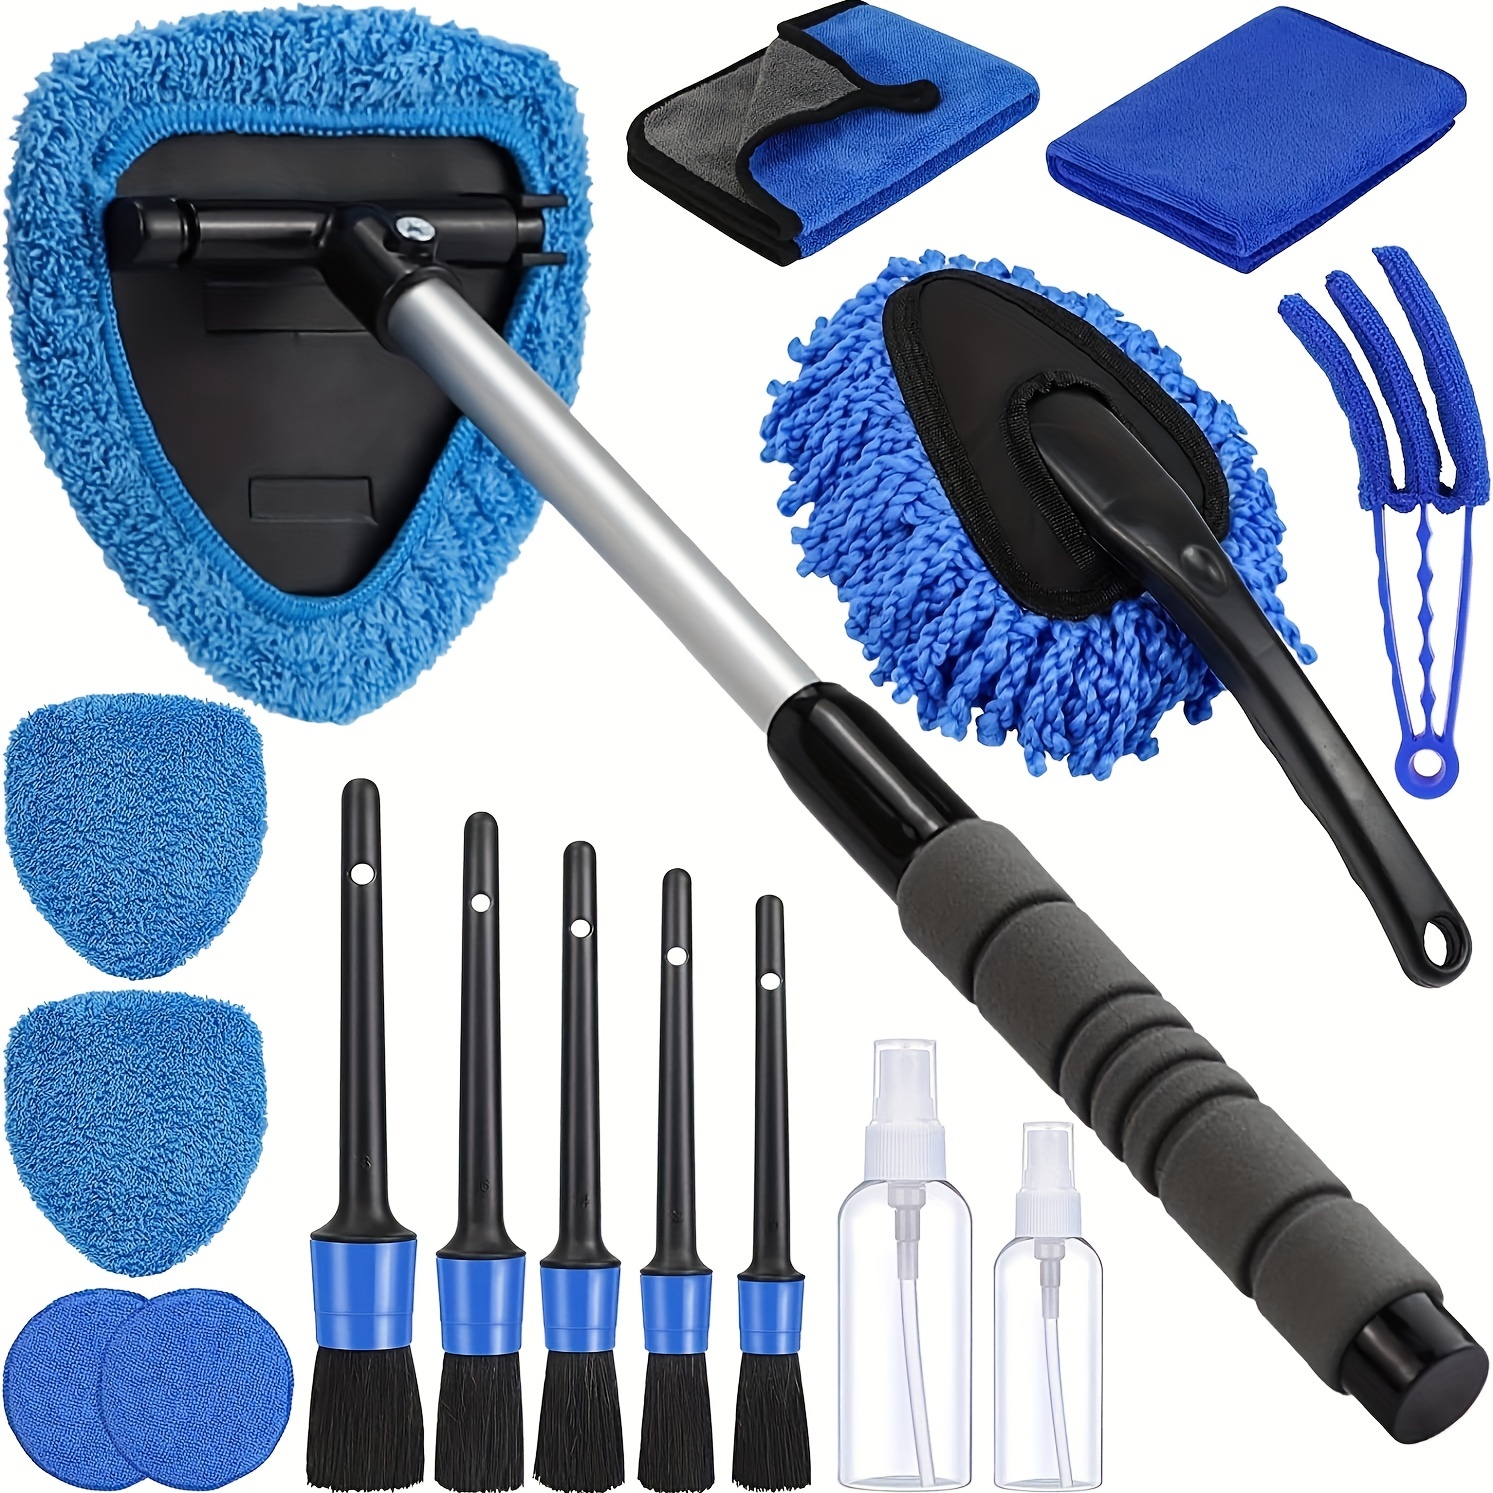 Windshield Cleaner Tool with Microfiber Cloth